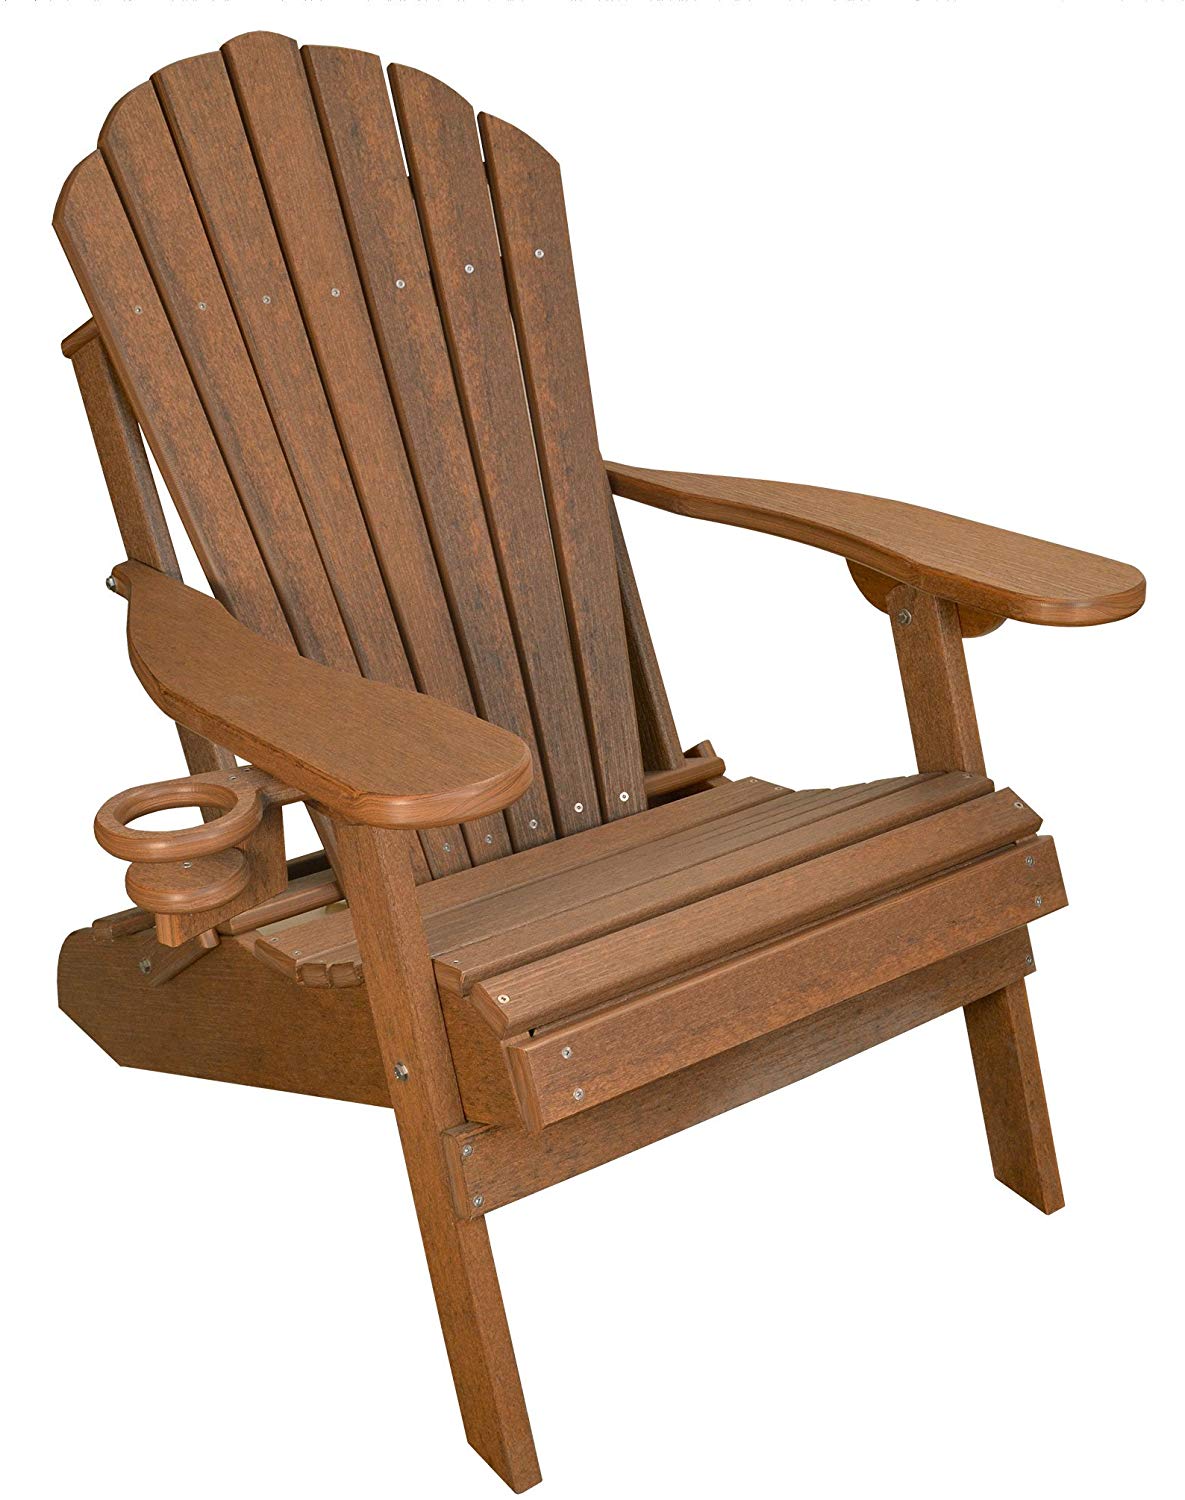 ECCB Outdoor Outer Banks Deluxe Oversized Adirondack Chair